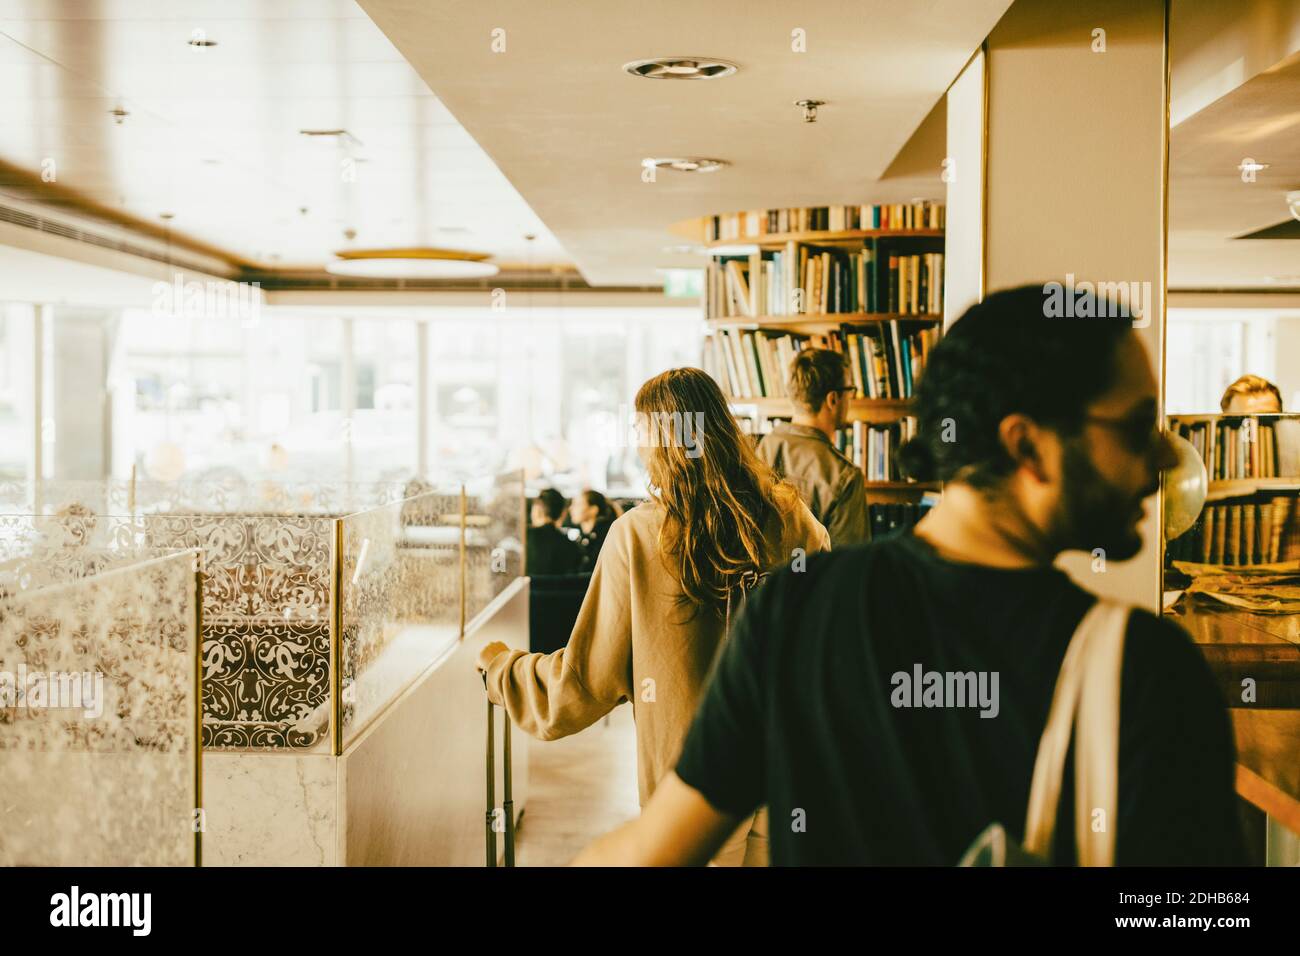 Rear view of people walking with luggage in hotel lobby Stock Photo